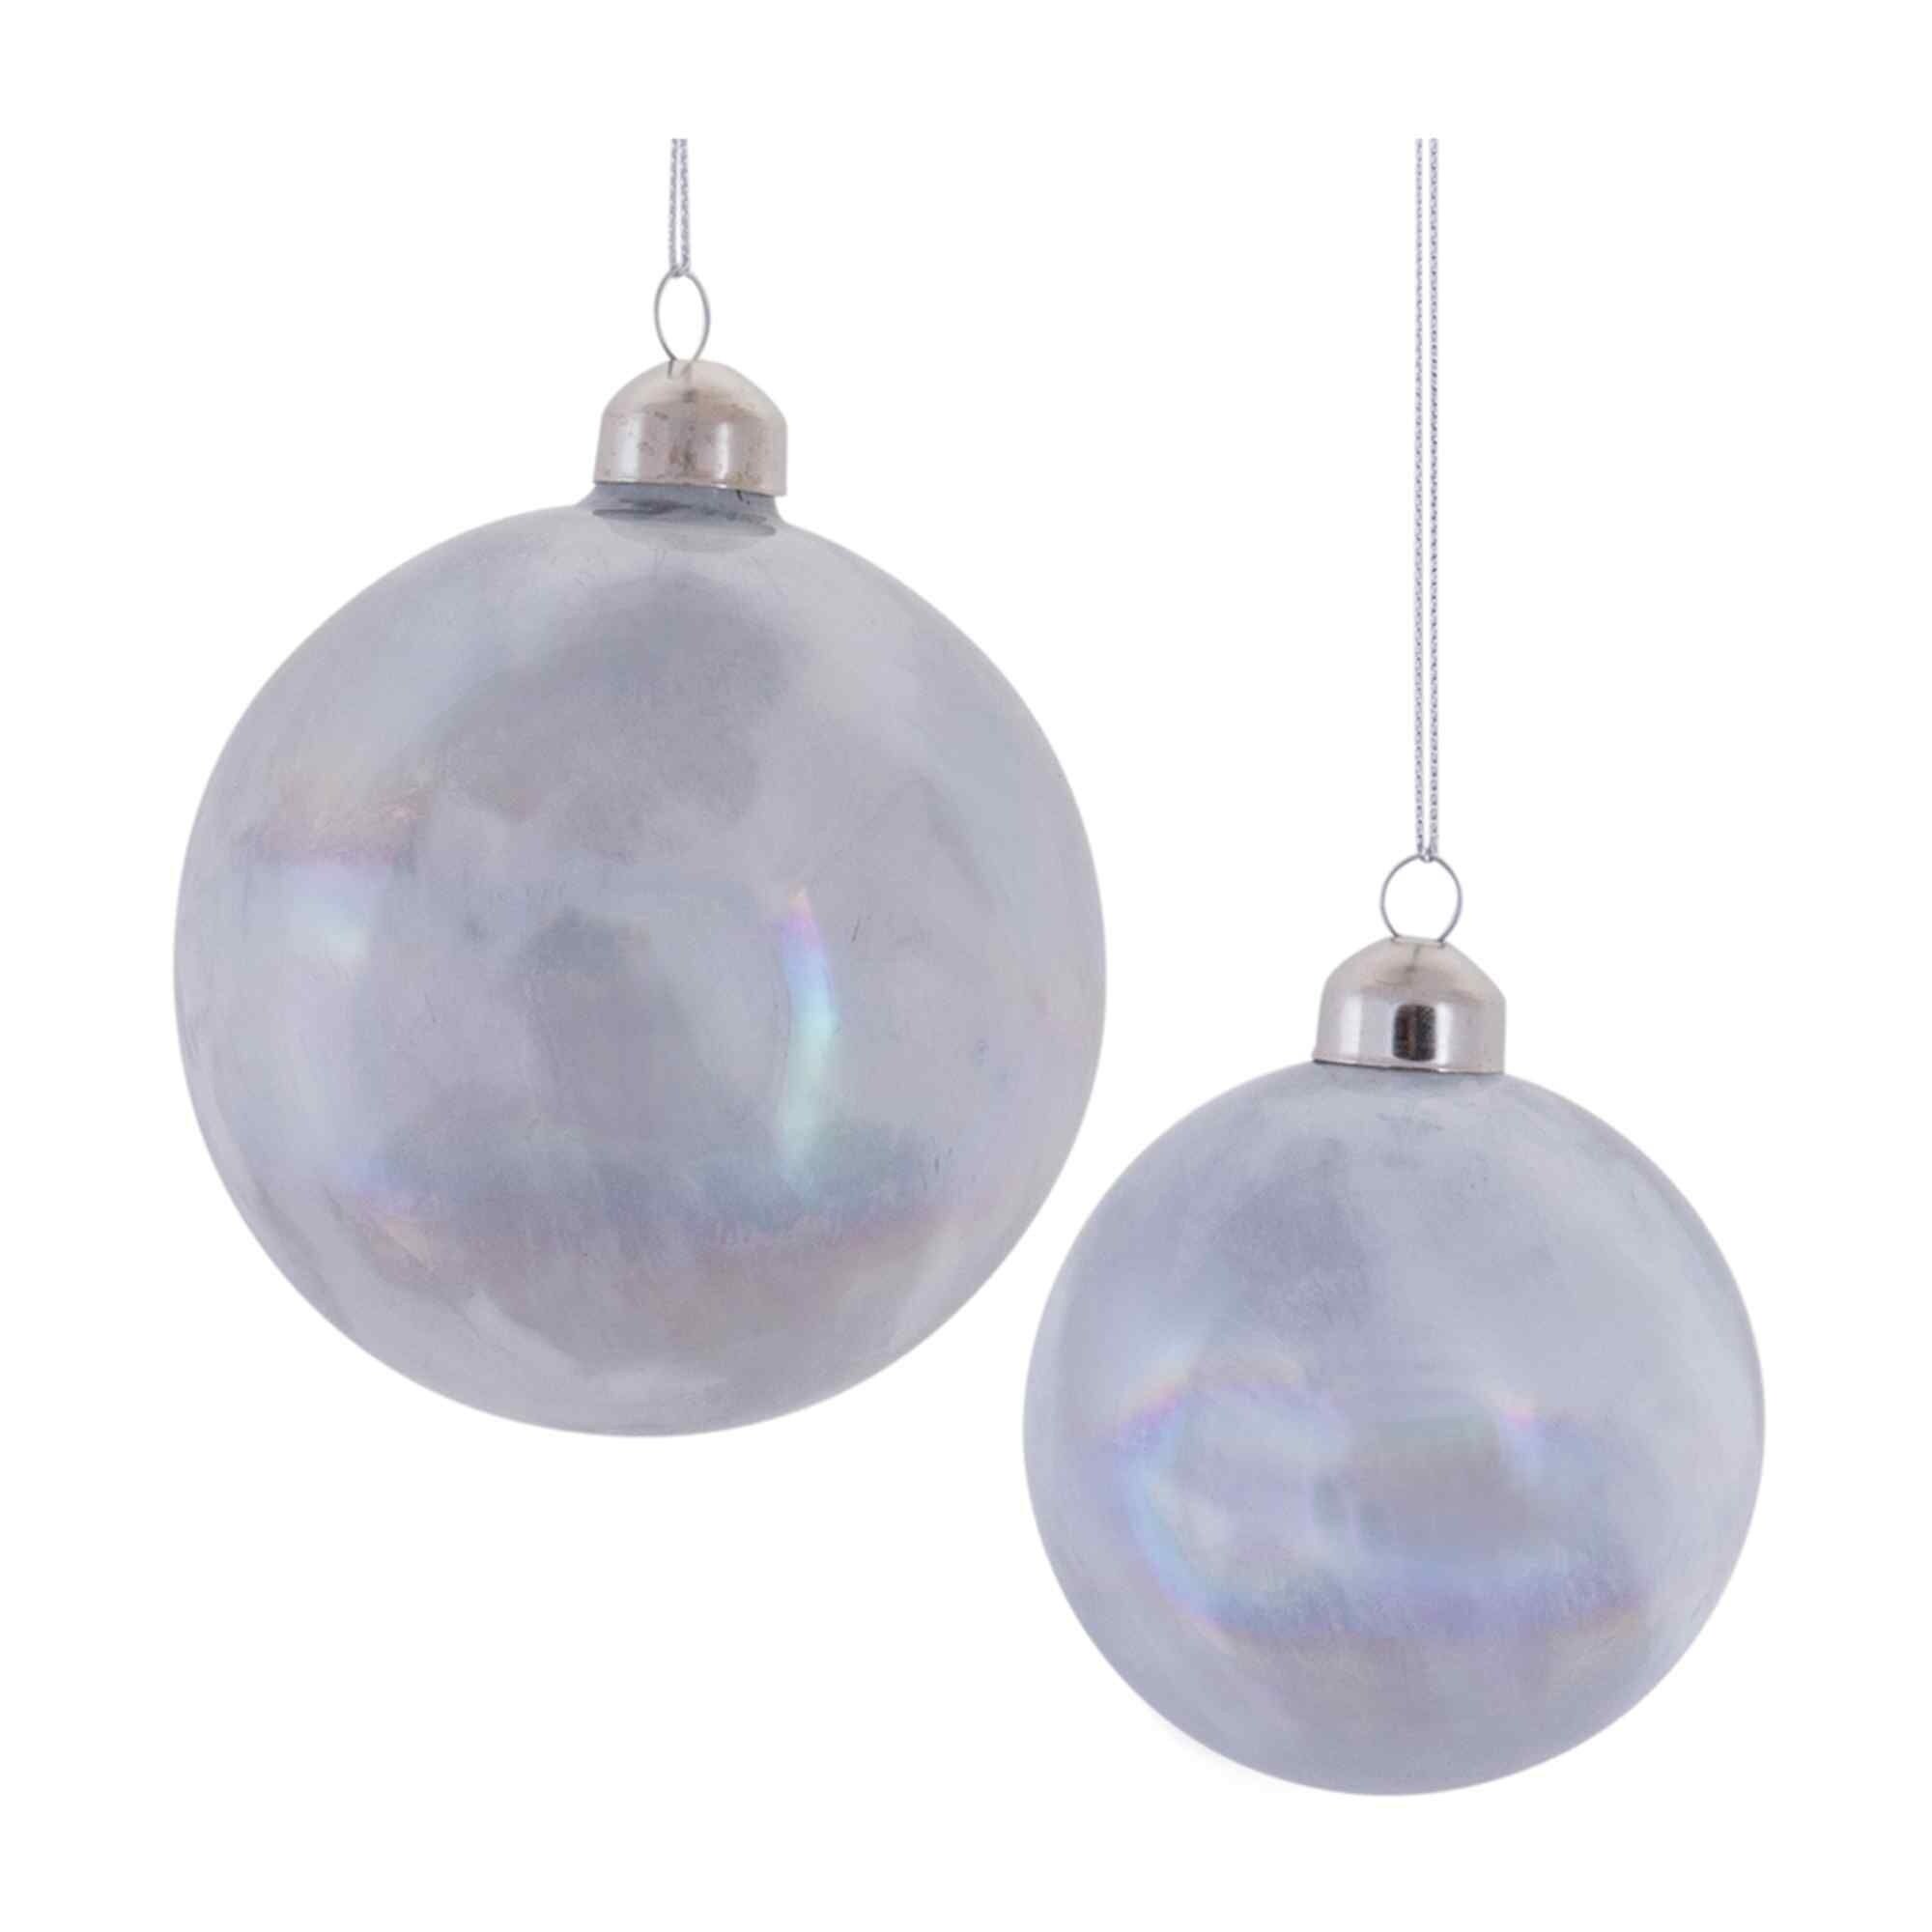 iridescent christmas ornaments - Google Search  Christmas ornaments,  Christmas decorations ornaments, Best christmas tree decorations